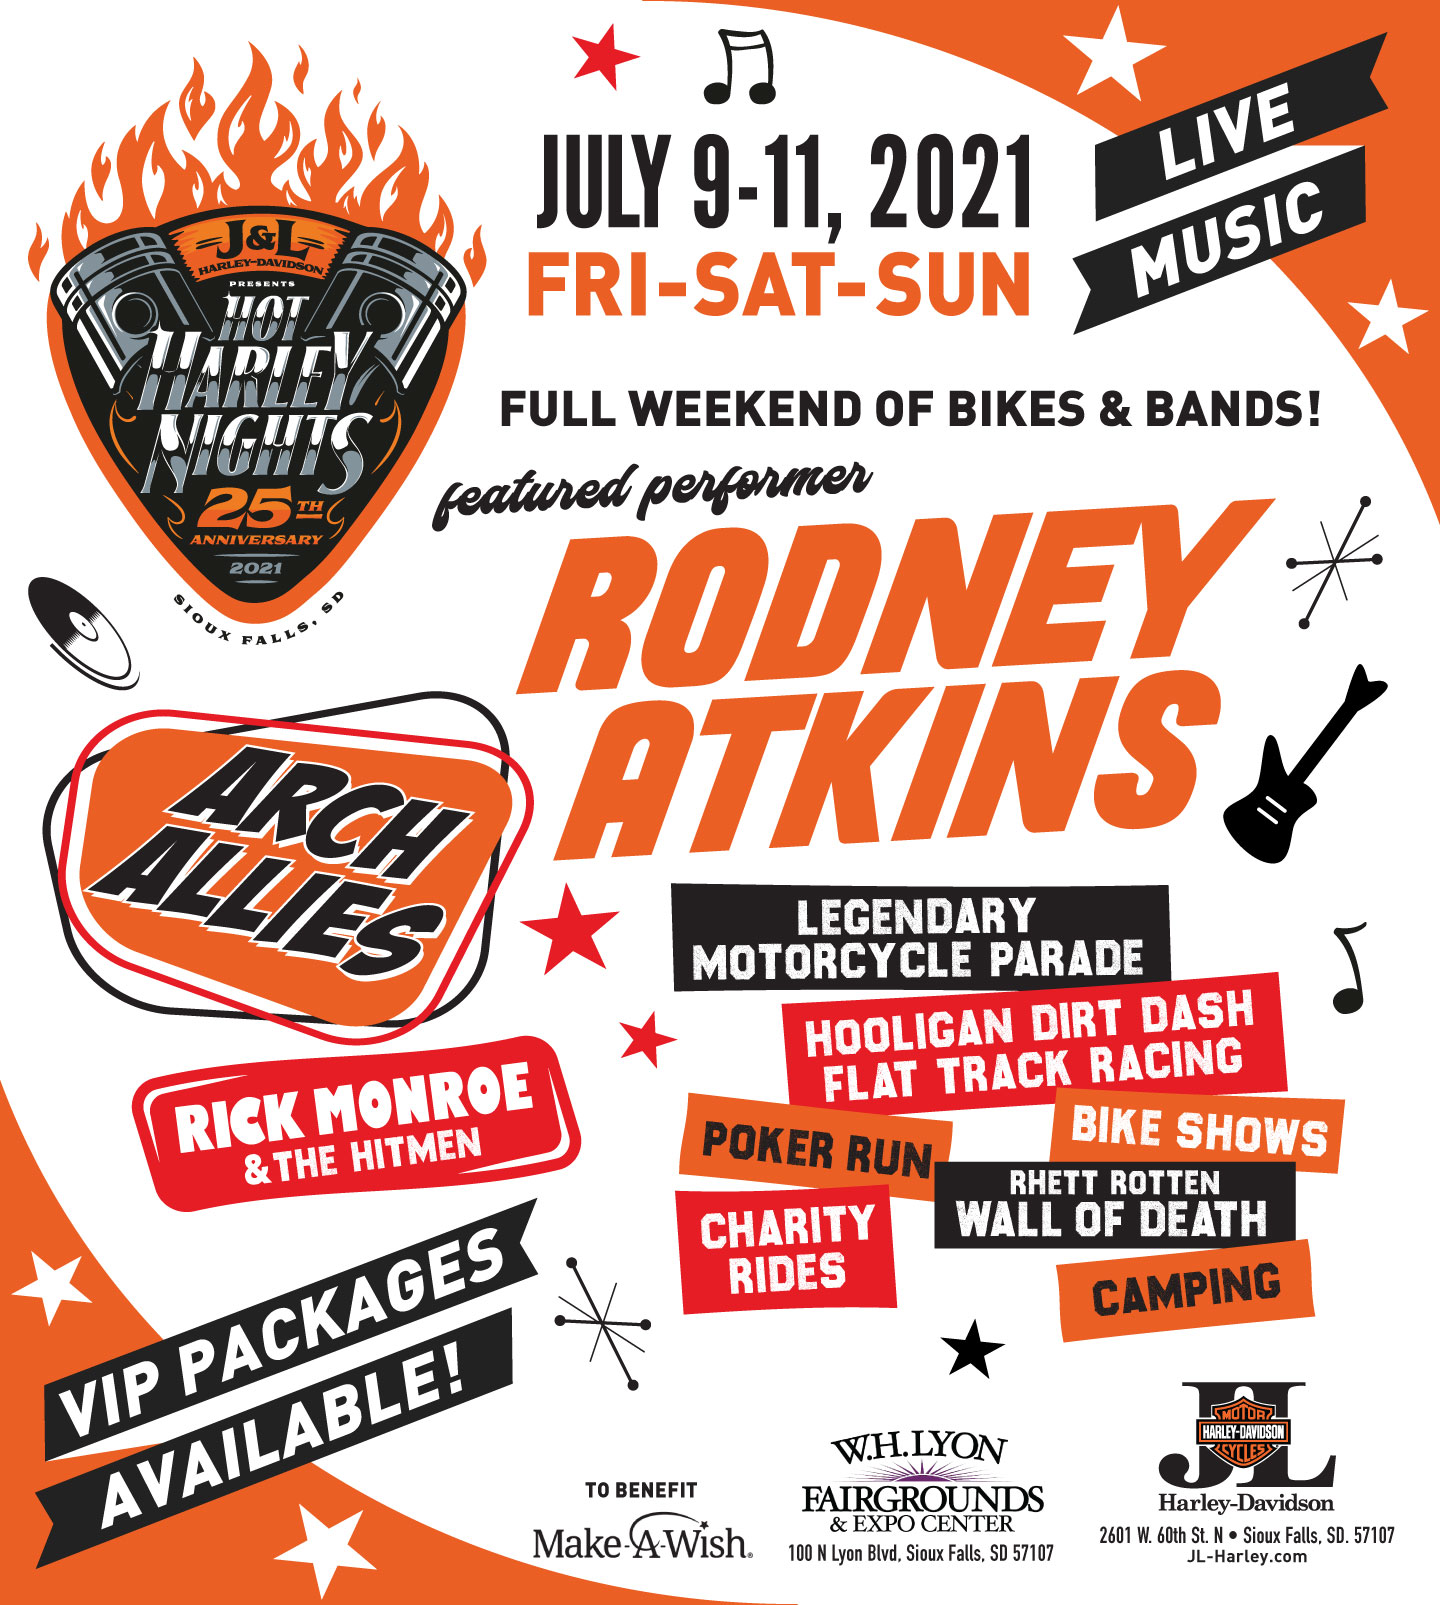 Buy Tickets to Hot Harley Nights 25th Anniversary Edition in Sioux